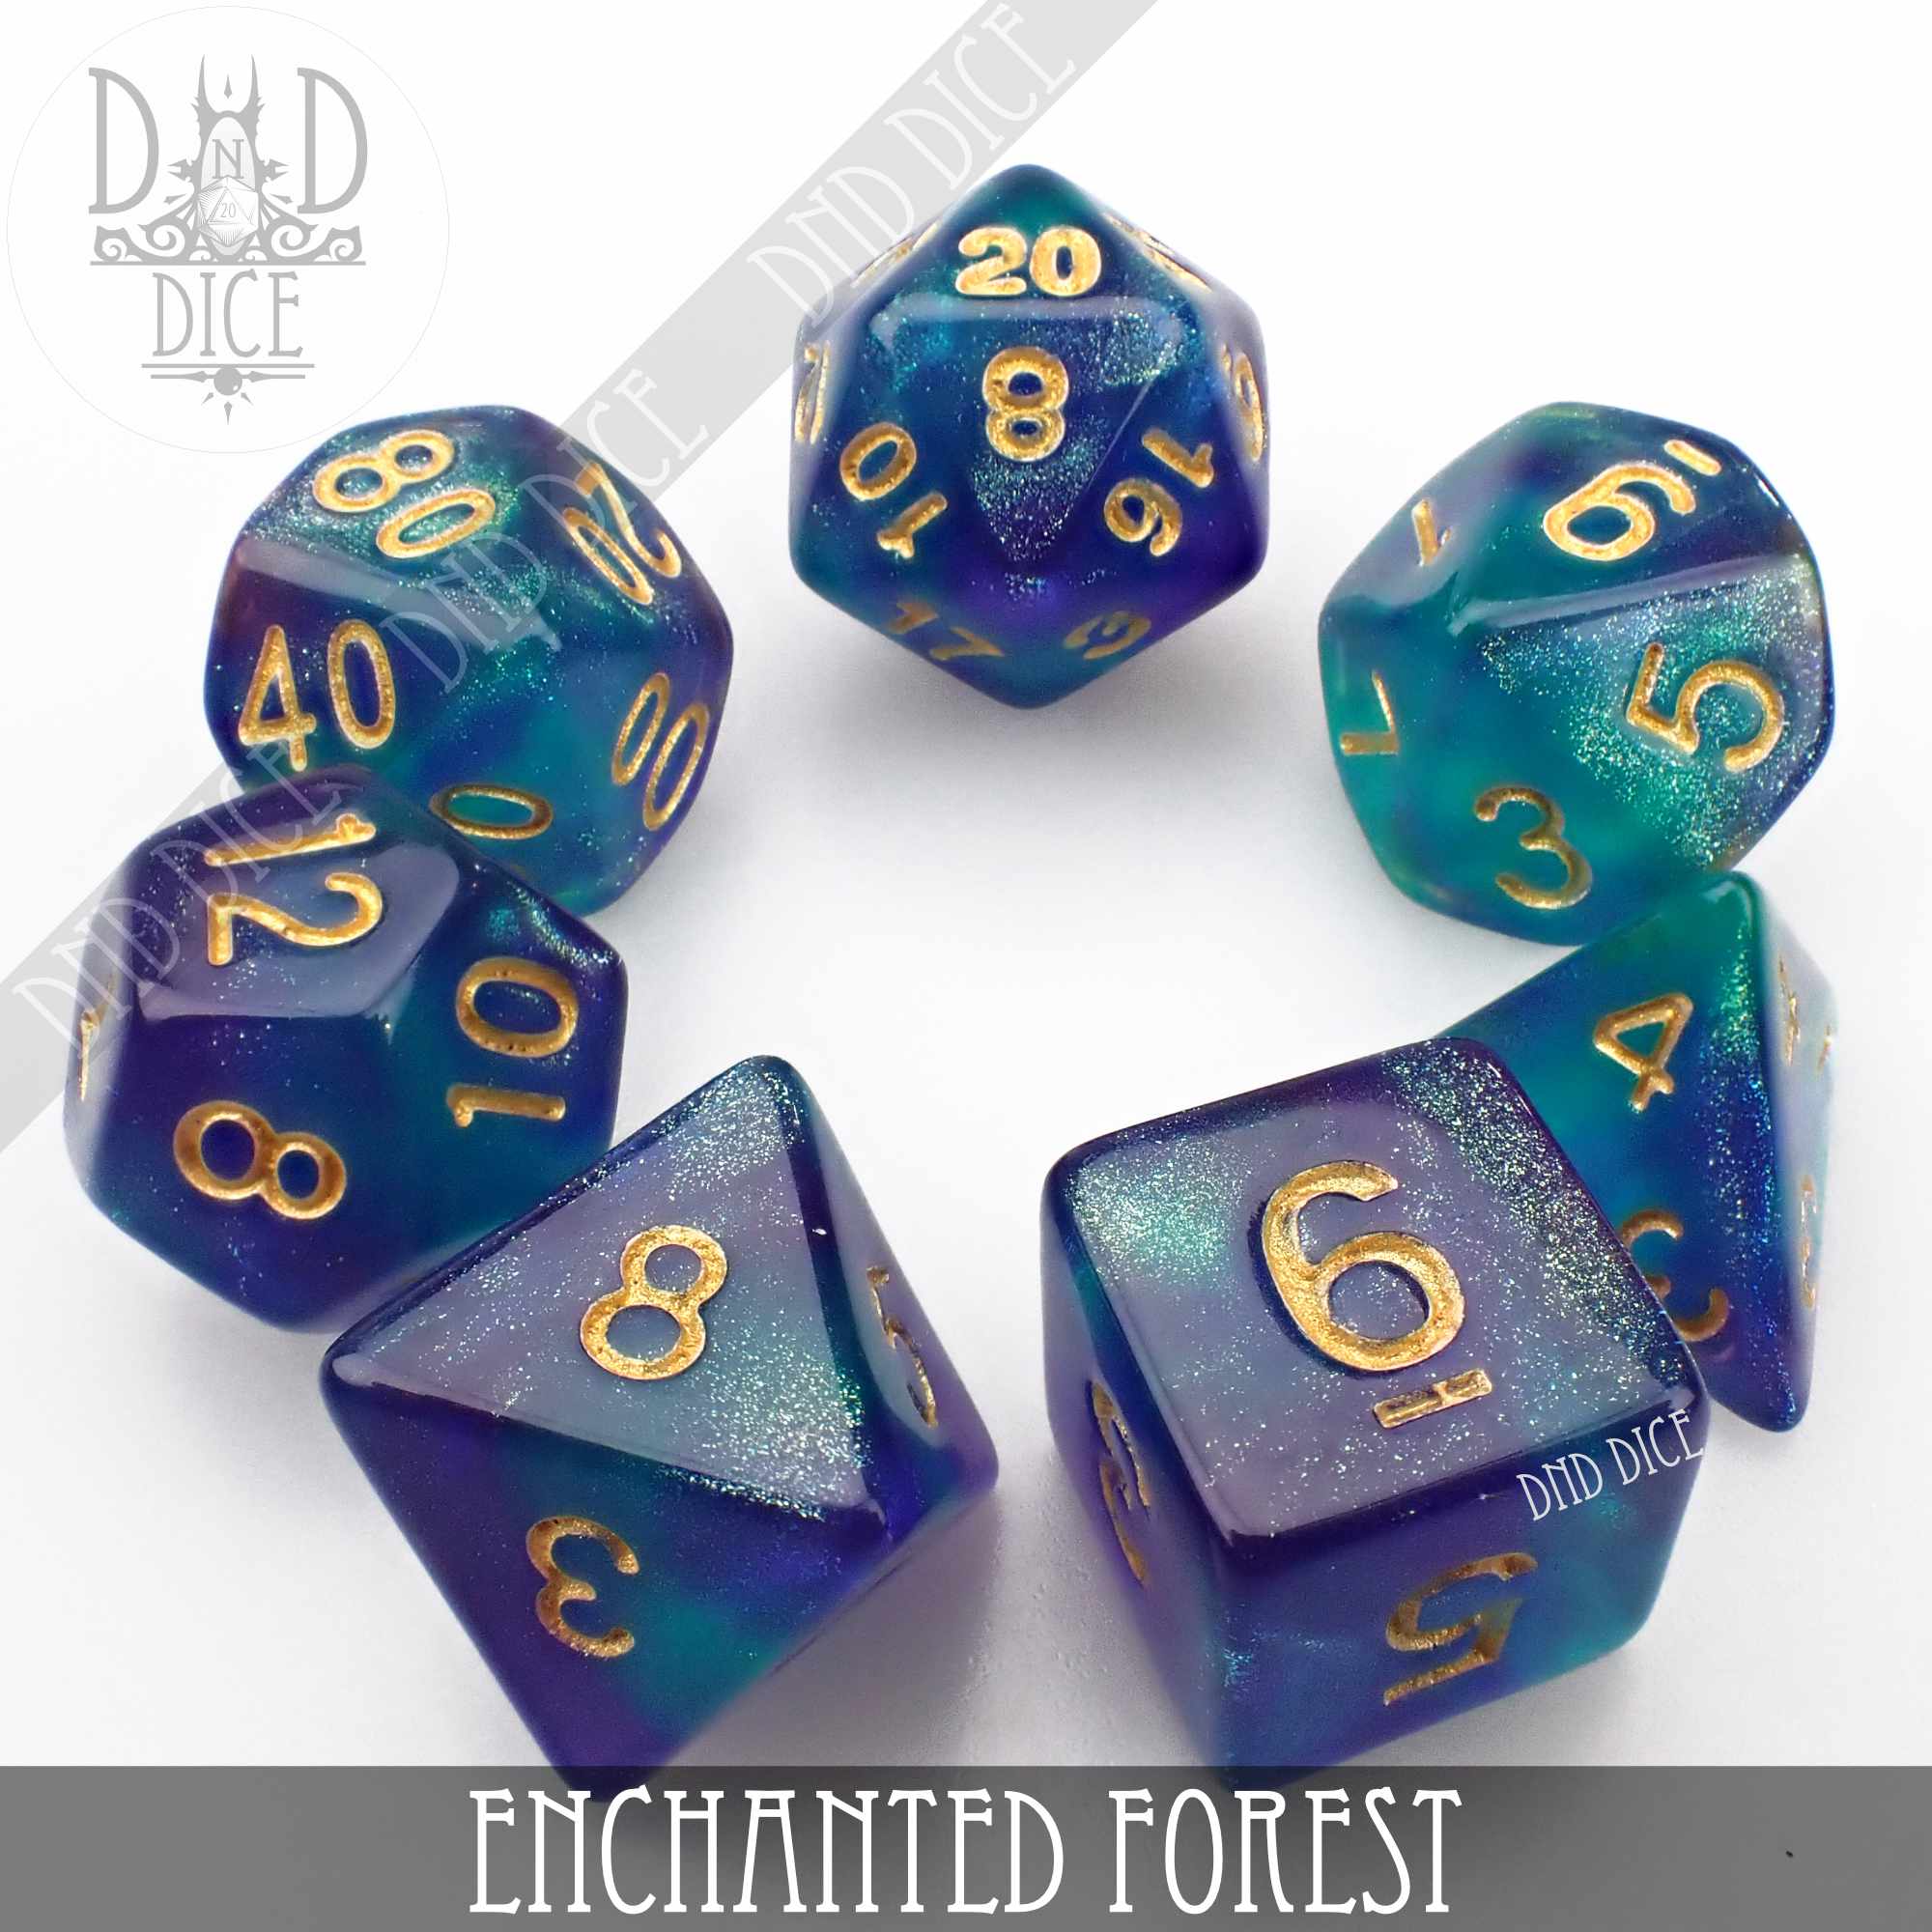 Enchanted Forest Dice Set